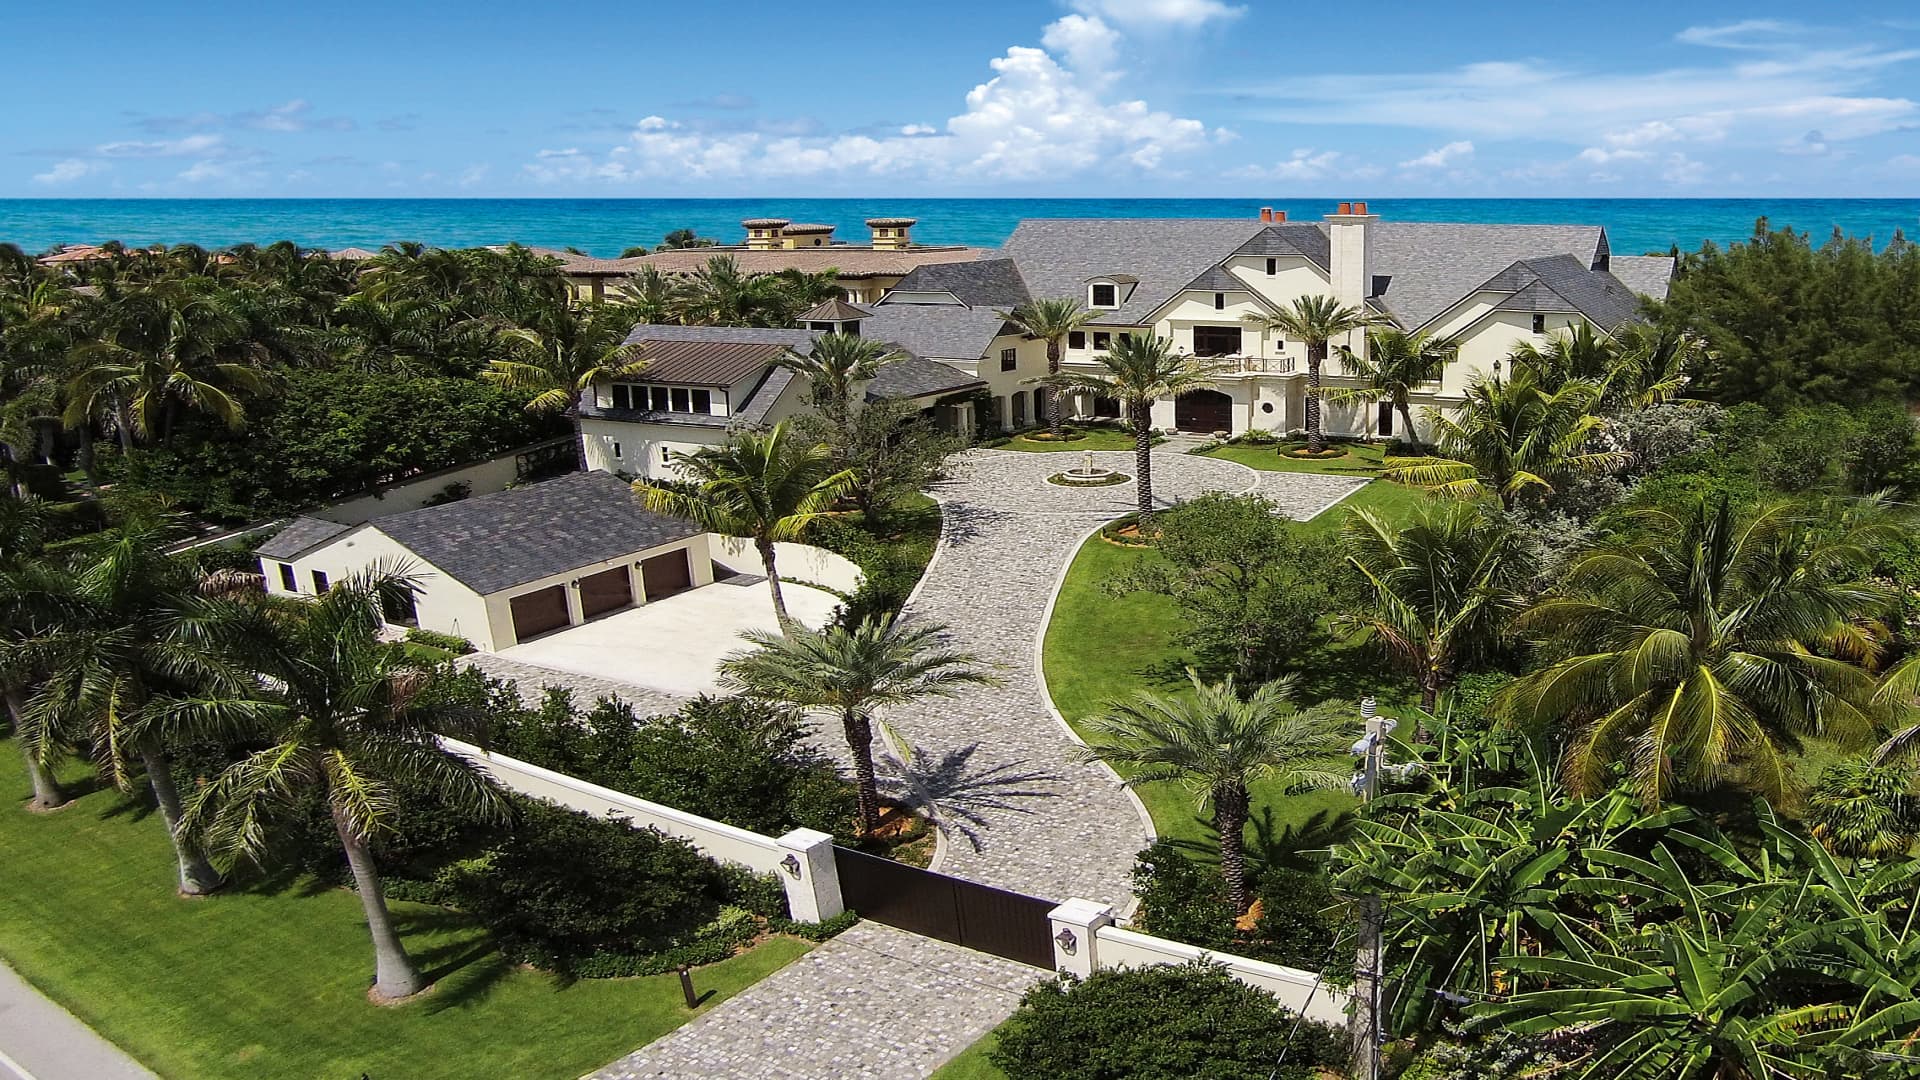 Here are the 5 hottest luxury real estate markets in South Florida